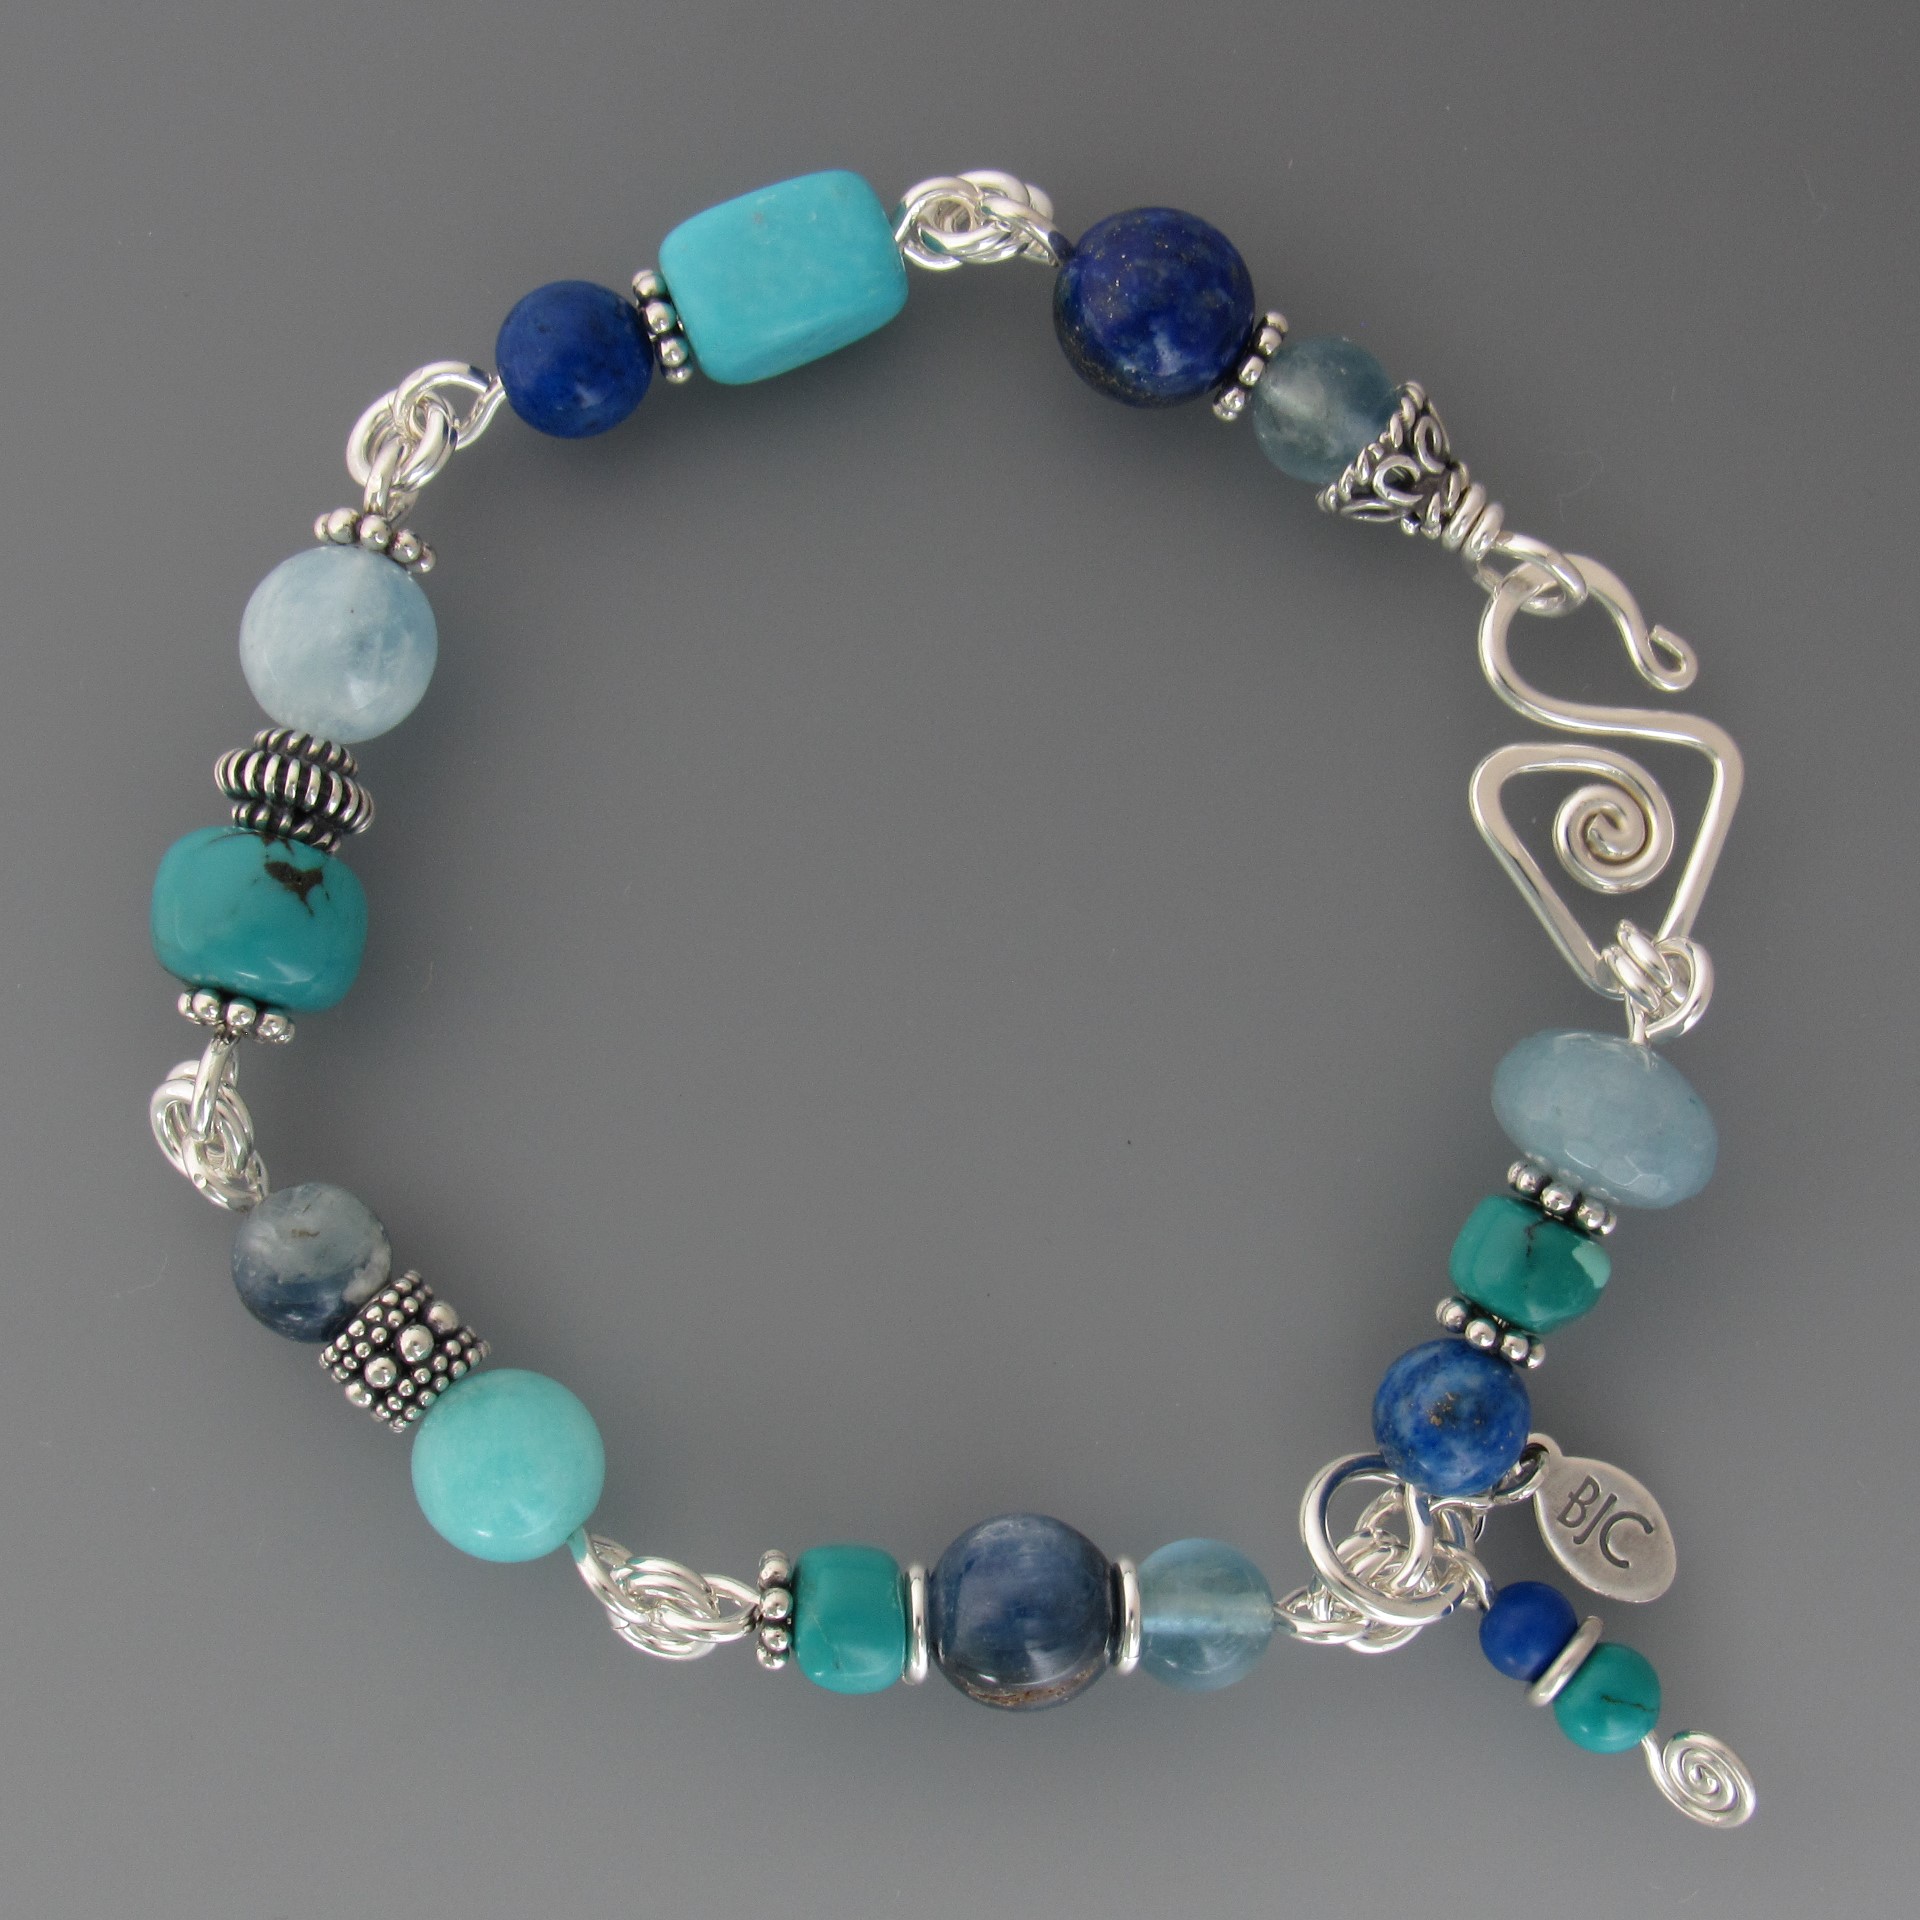 Blue fluorite bracelet -natural gemstone in harmony with nature